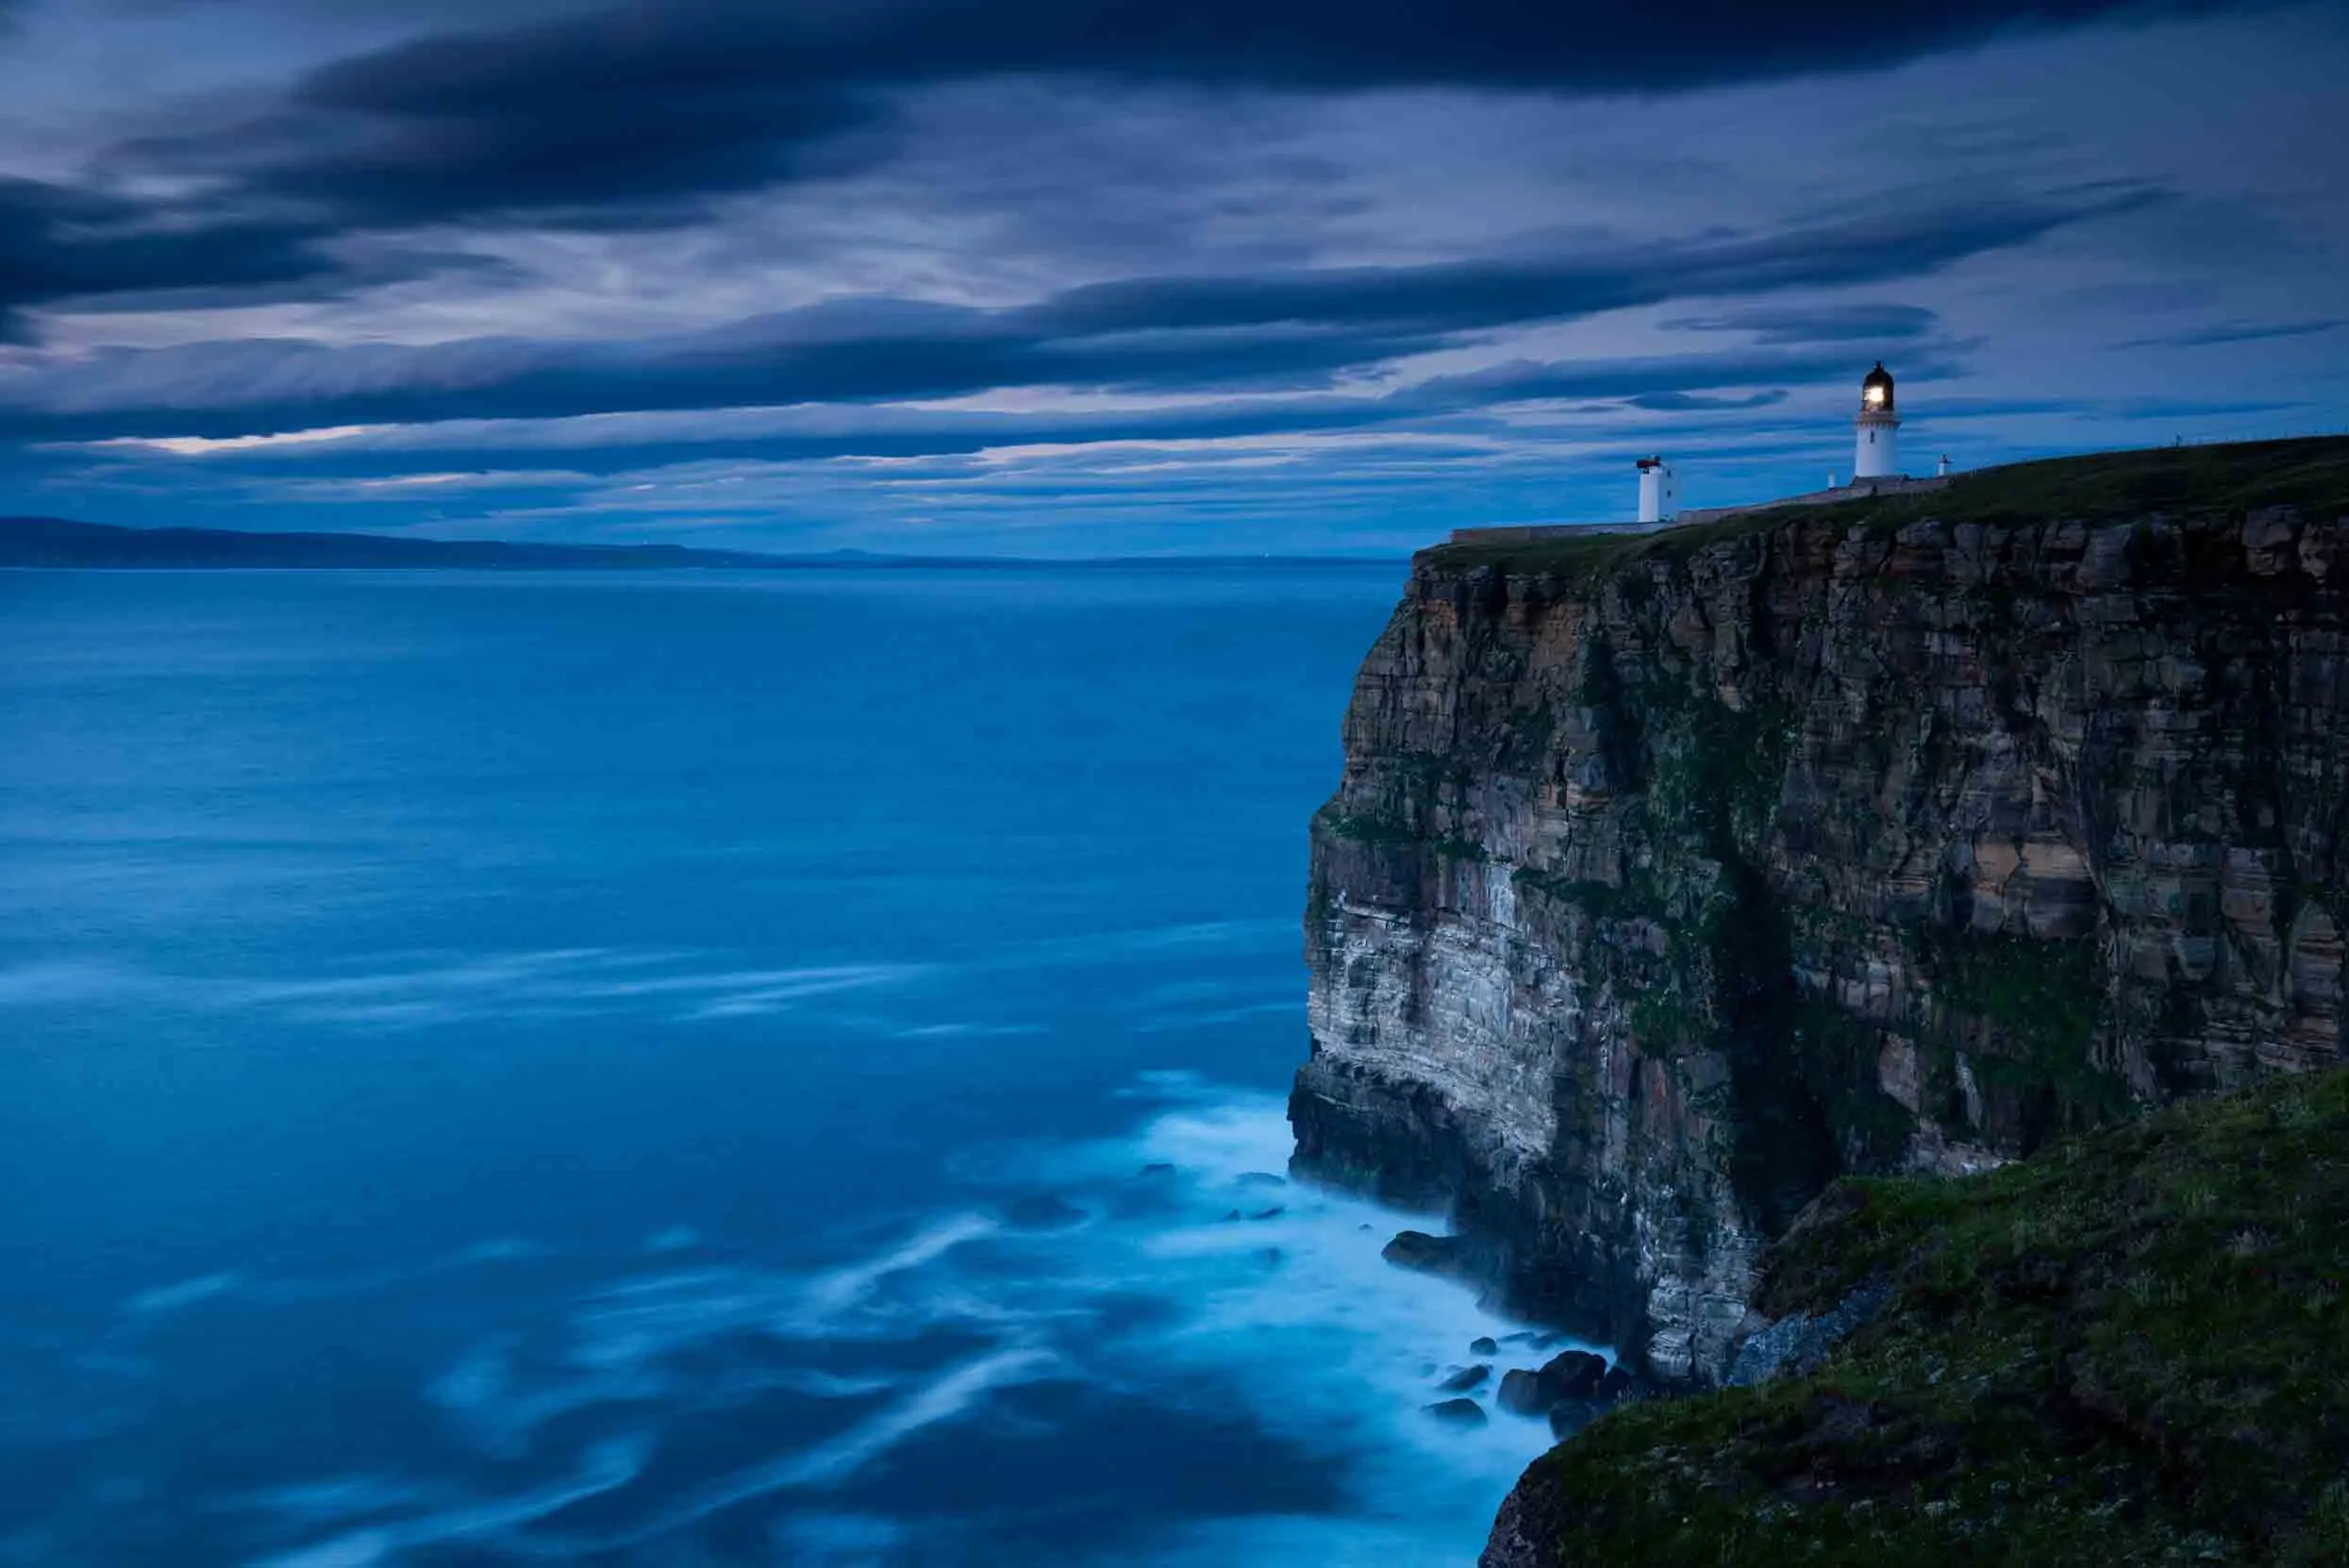 A dark blue sky looms over the calm blue sea at the base of the Dunnet Head cliffs, the light house can be seen at the top.